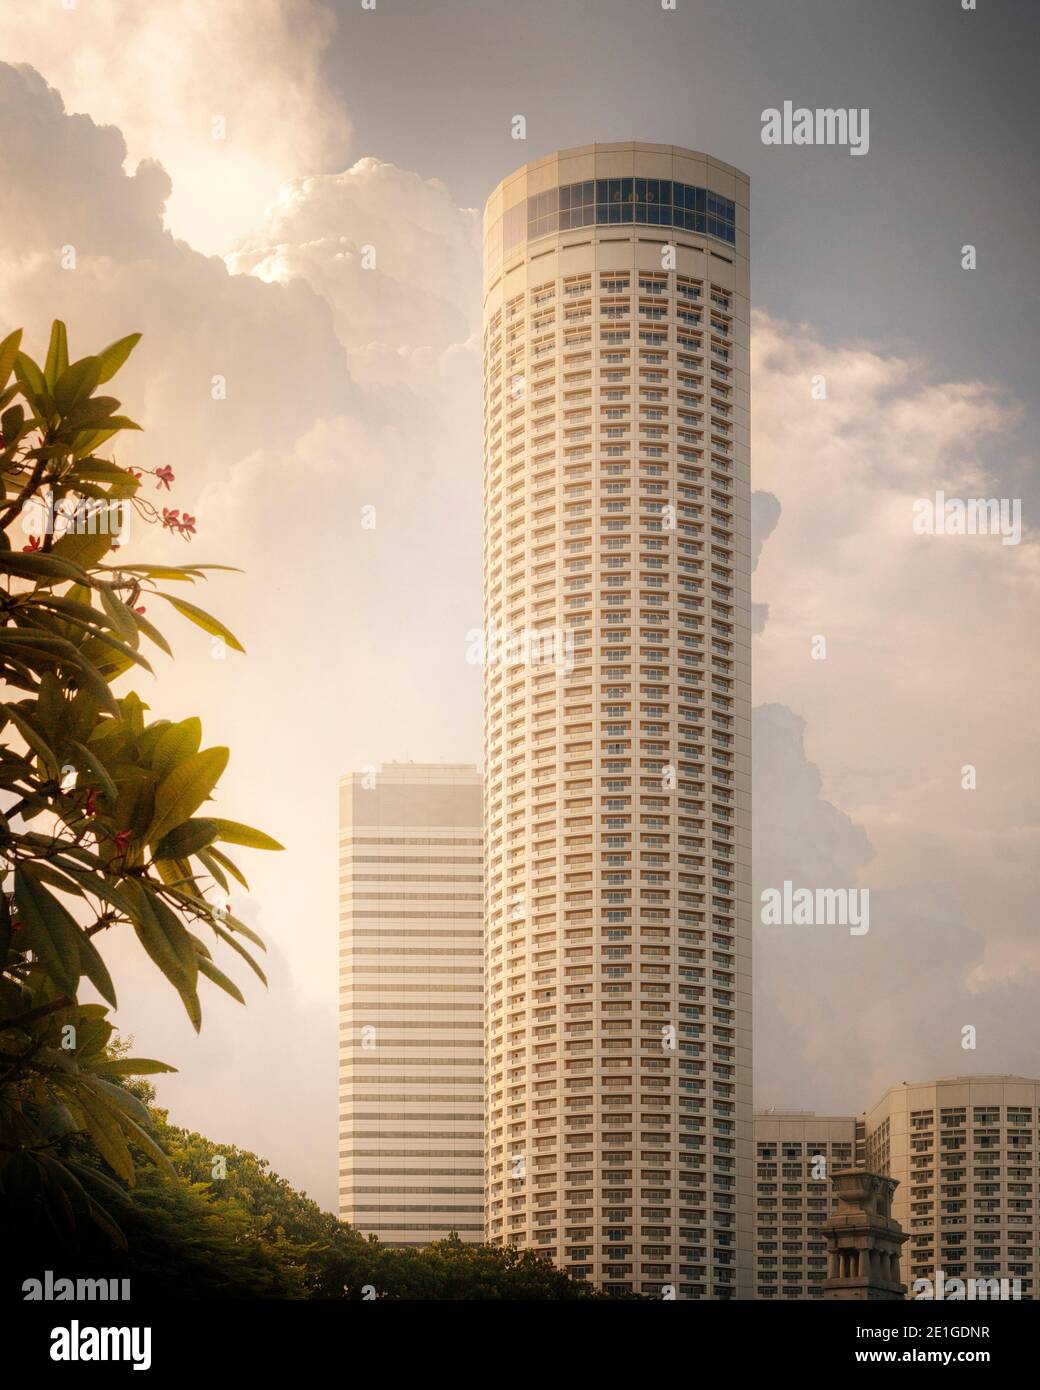 Swissotel The Stamford in Singapore, designed by architect I.M. Pei, at a height of 226 metres it is one of Southeast Asia's tallest hotels. Stock Photo